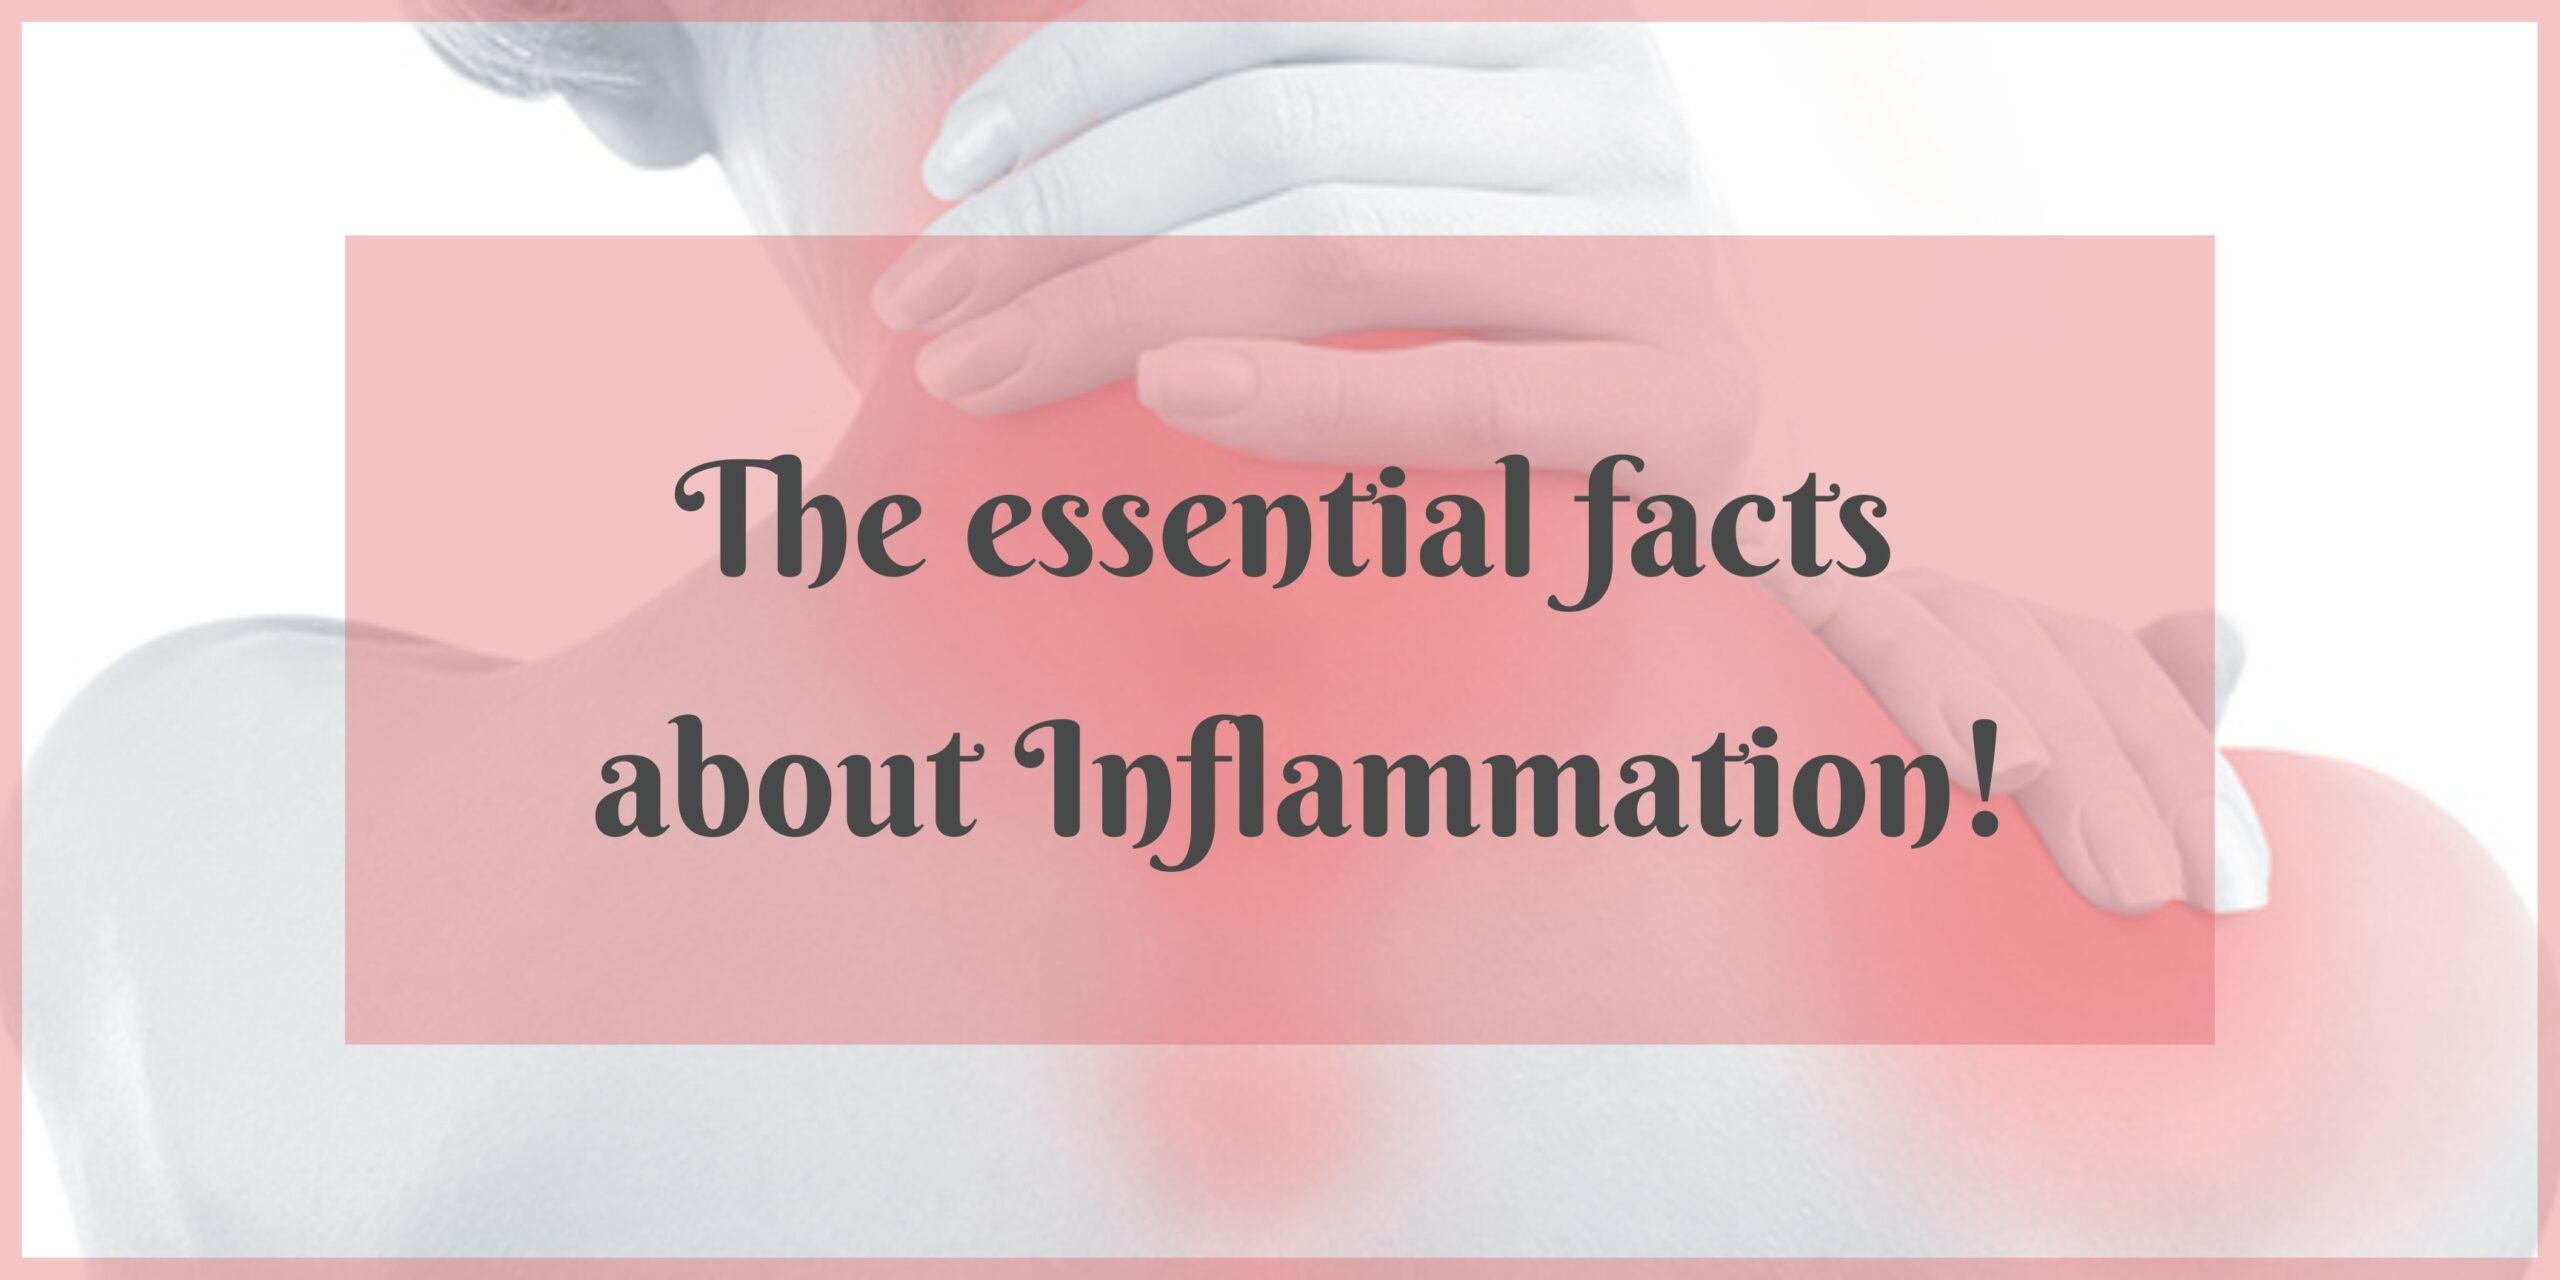 The essential facts about Inflammation!